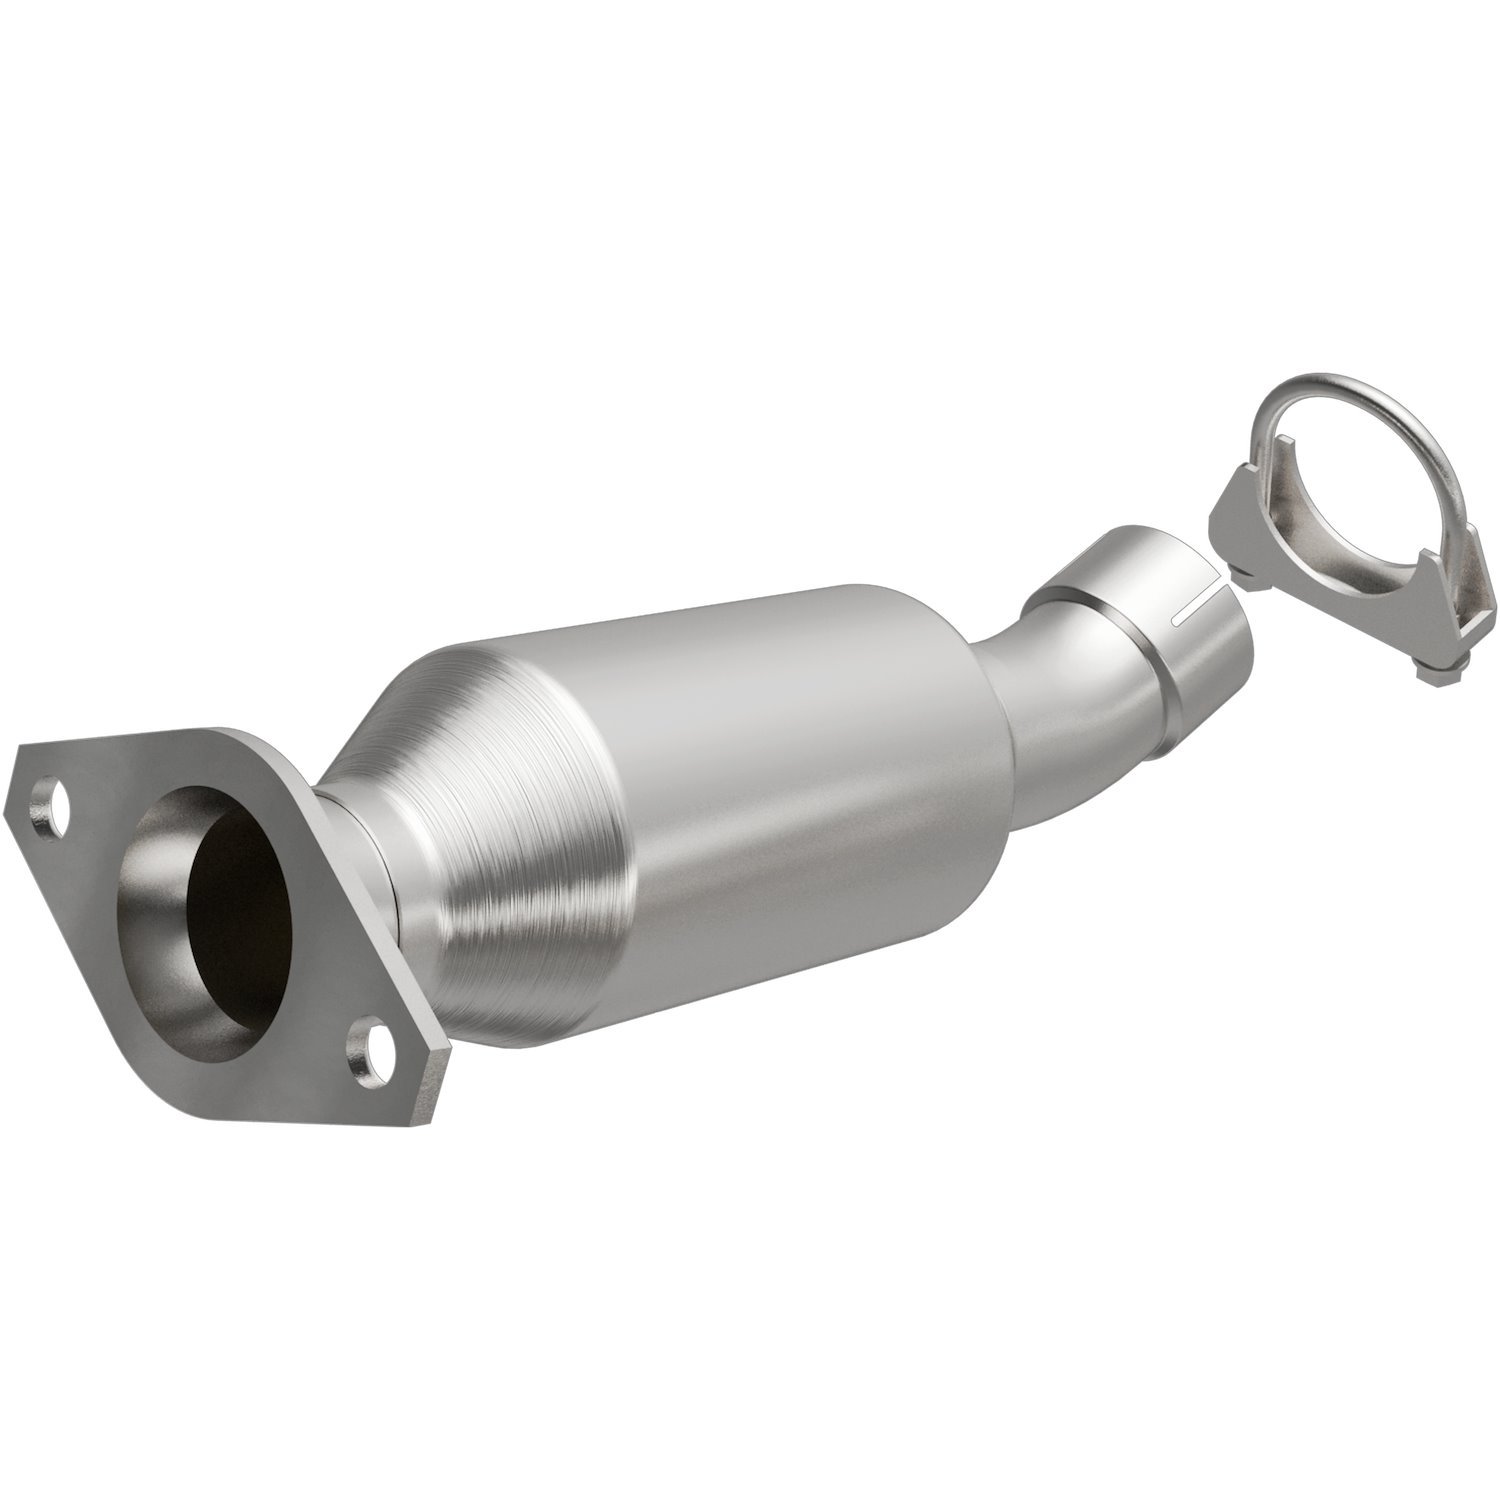 2012-2019 Toyota Prius C OEM Grade Federal / EPA Compliant Direct-Fit Catalytic Converter